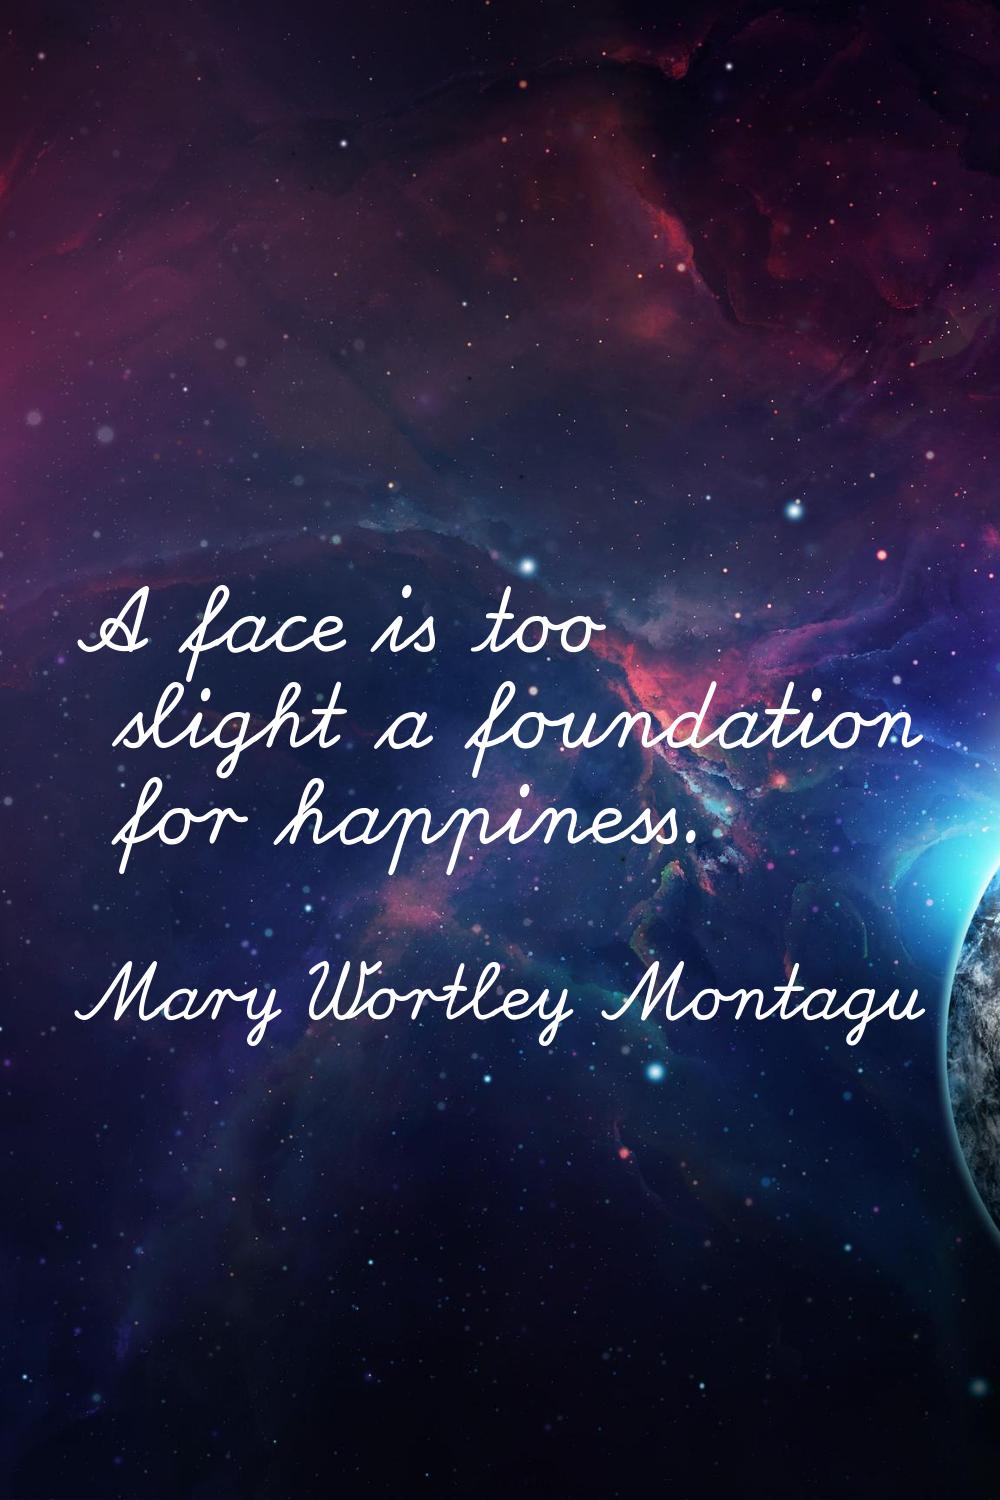 A face is too slight a foundation for happiness.